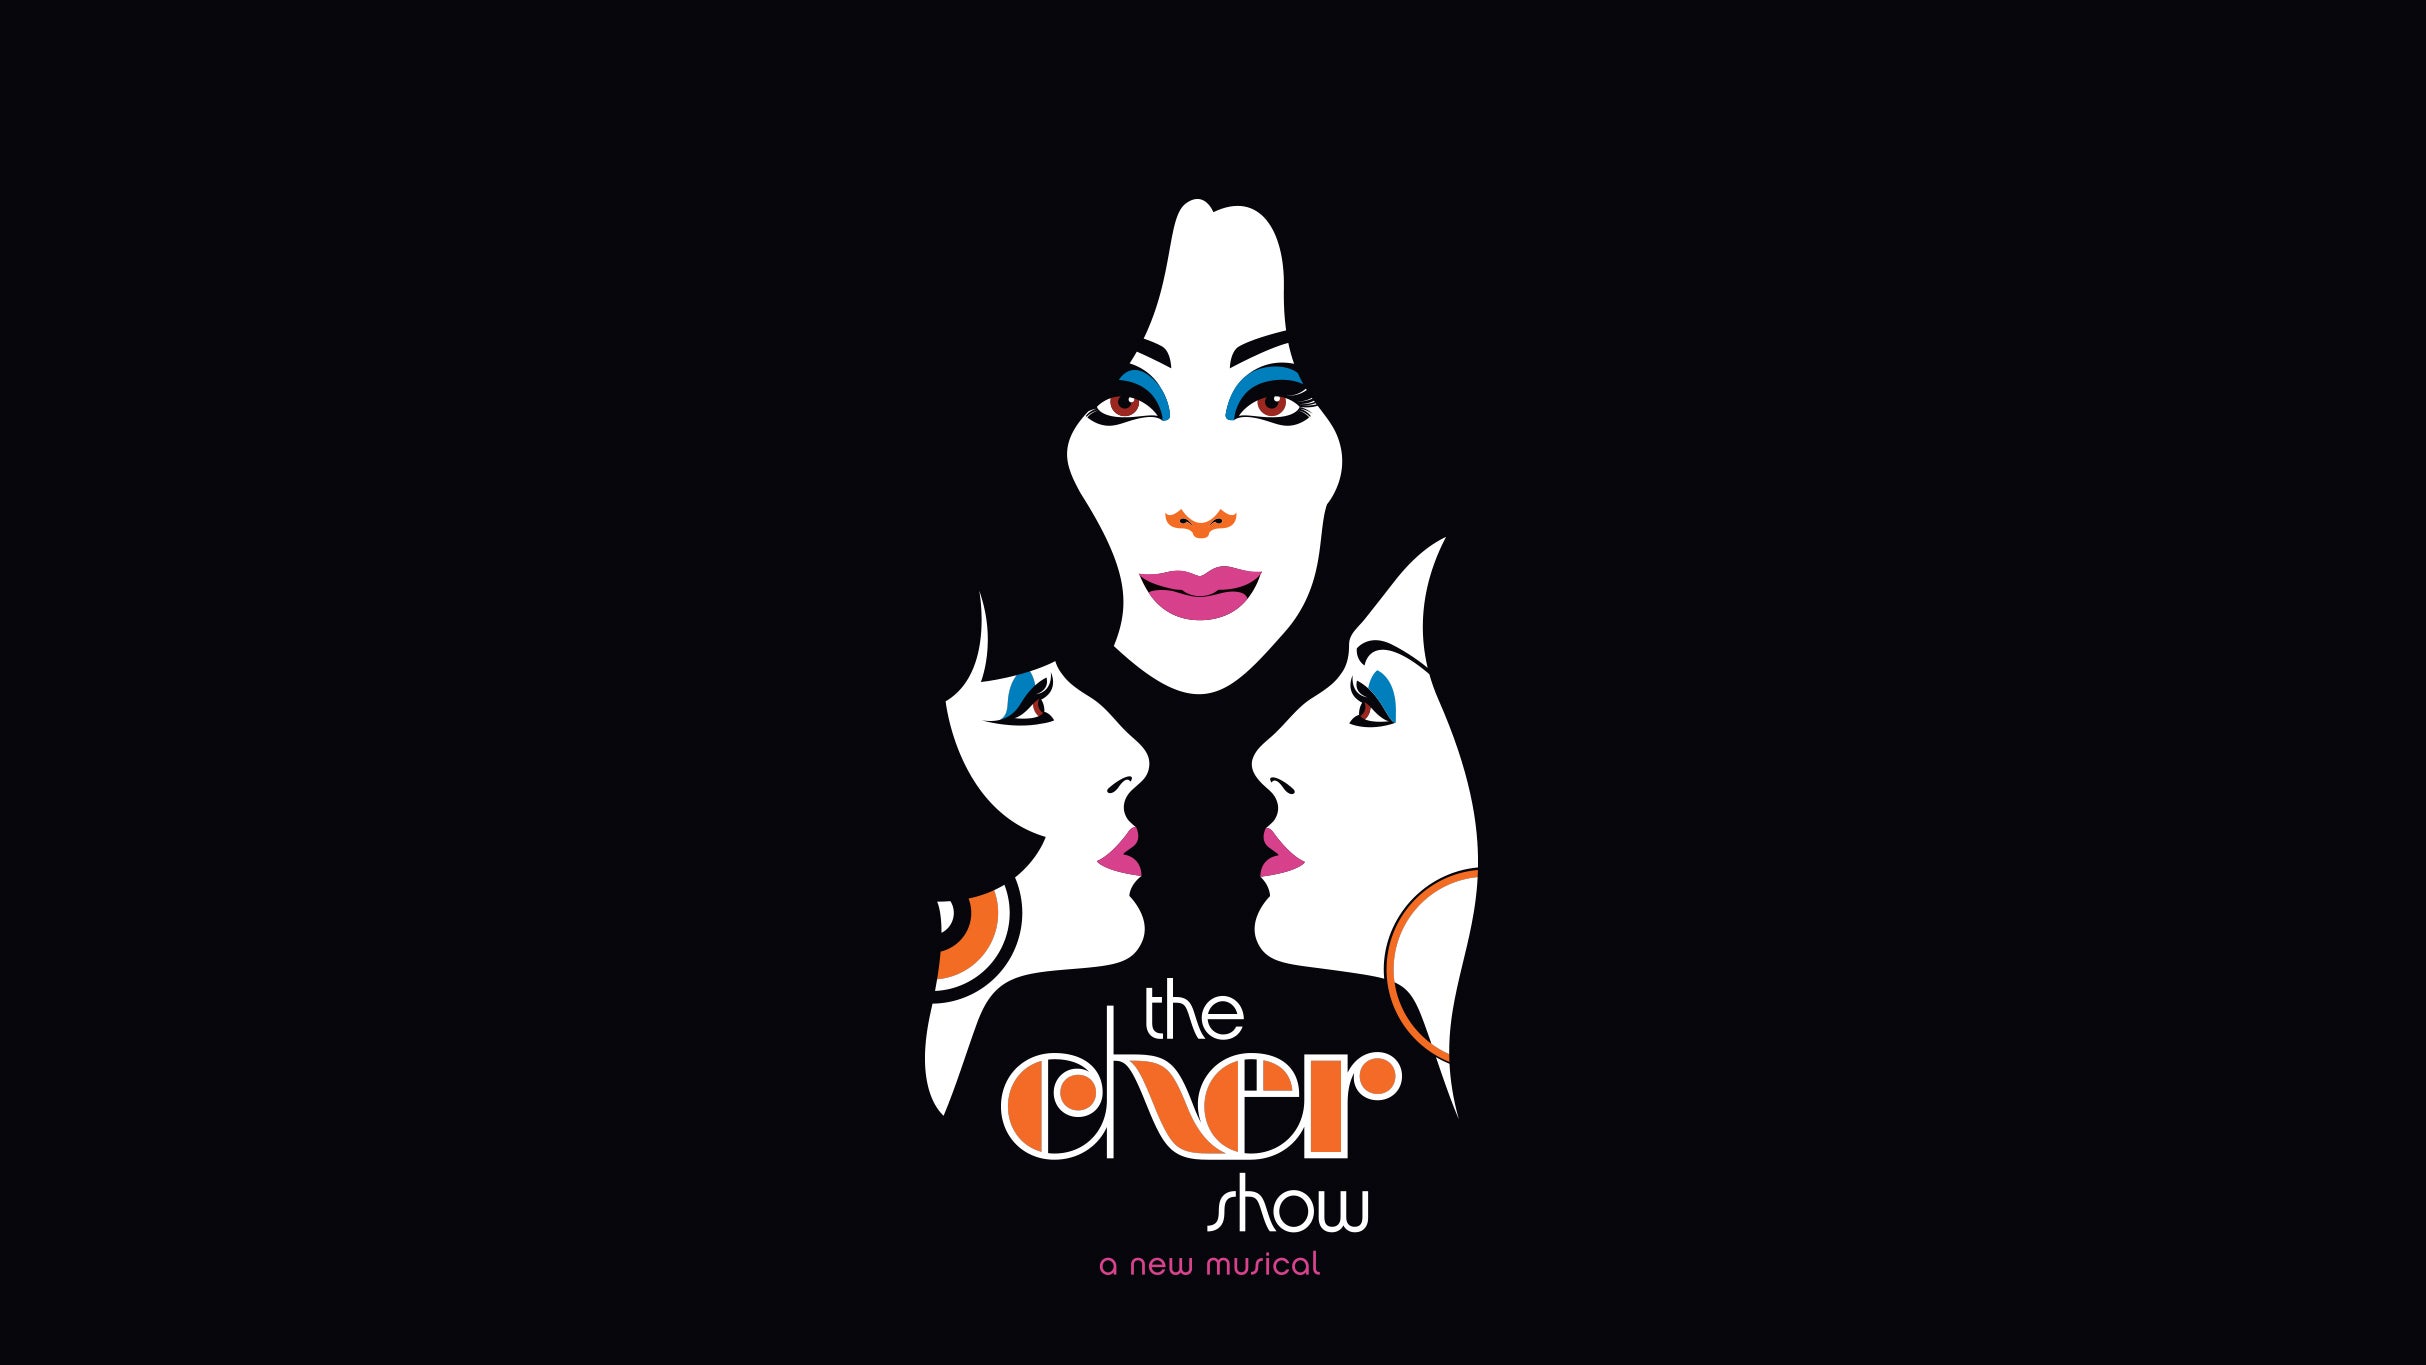 presale pa55w0rd for The Cher Show (Touring) tickets in Peoria - IL (Peoria Civic Center)